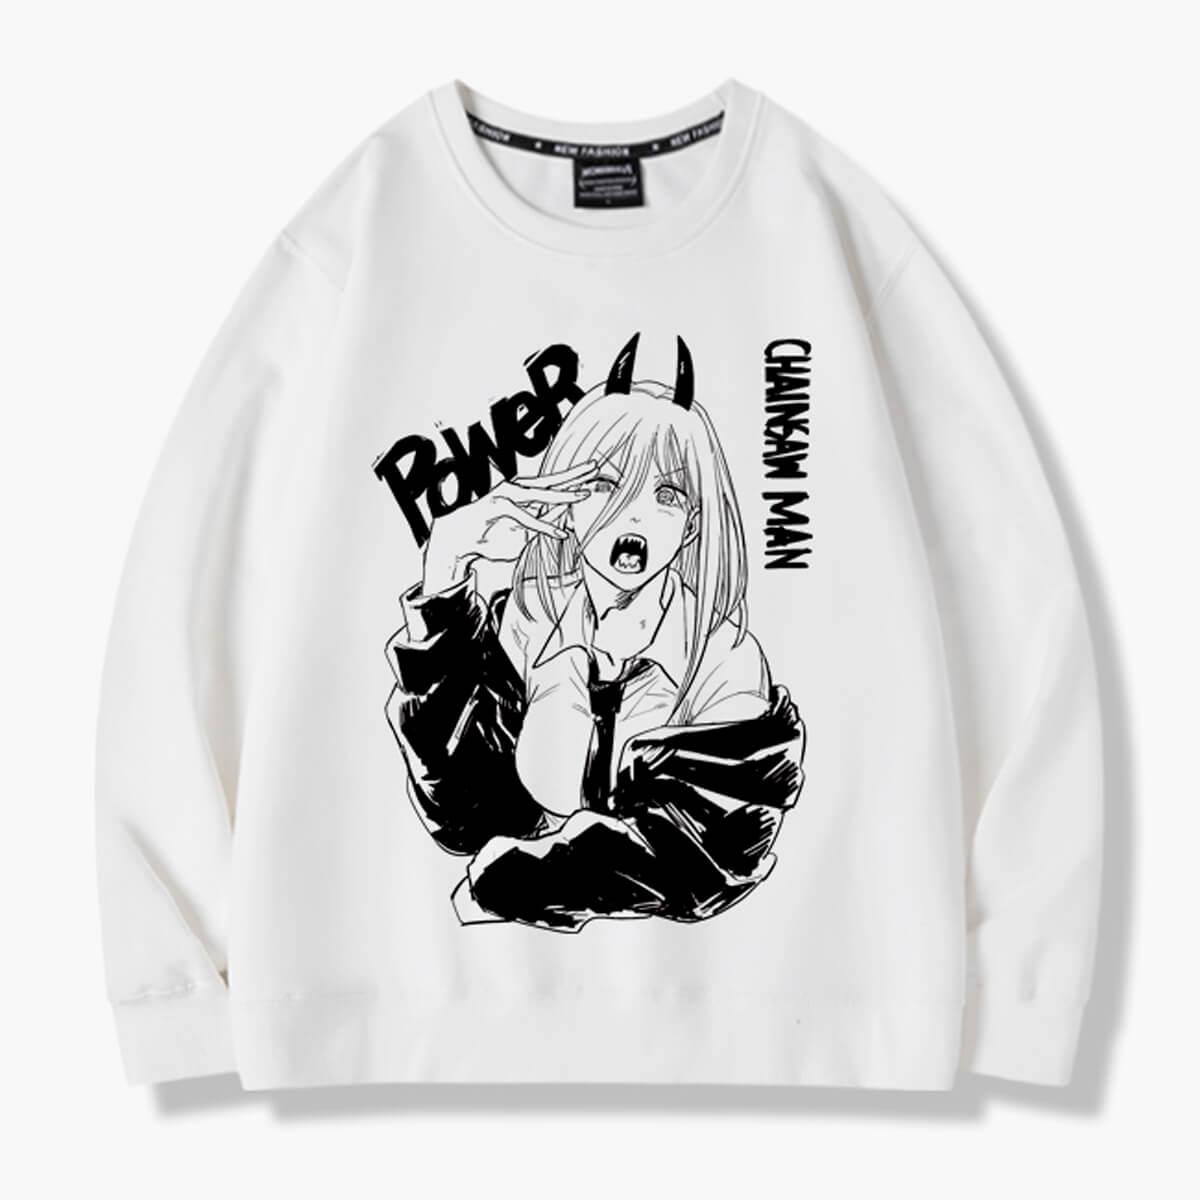 Annoyed Power Chainsaw Man Sweatshirt - Aesthetic Clothes Shop